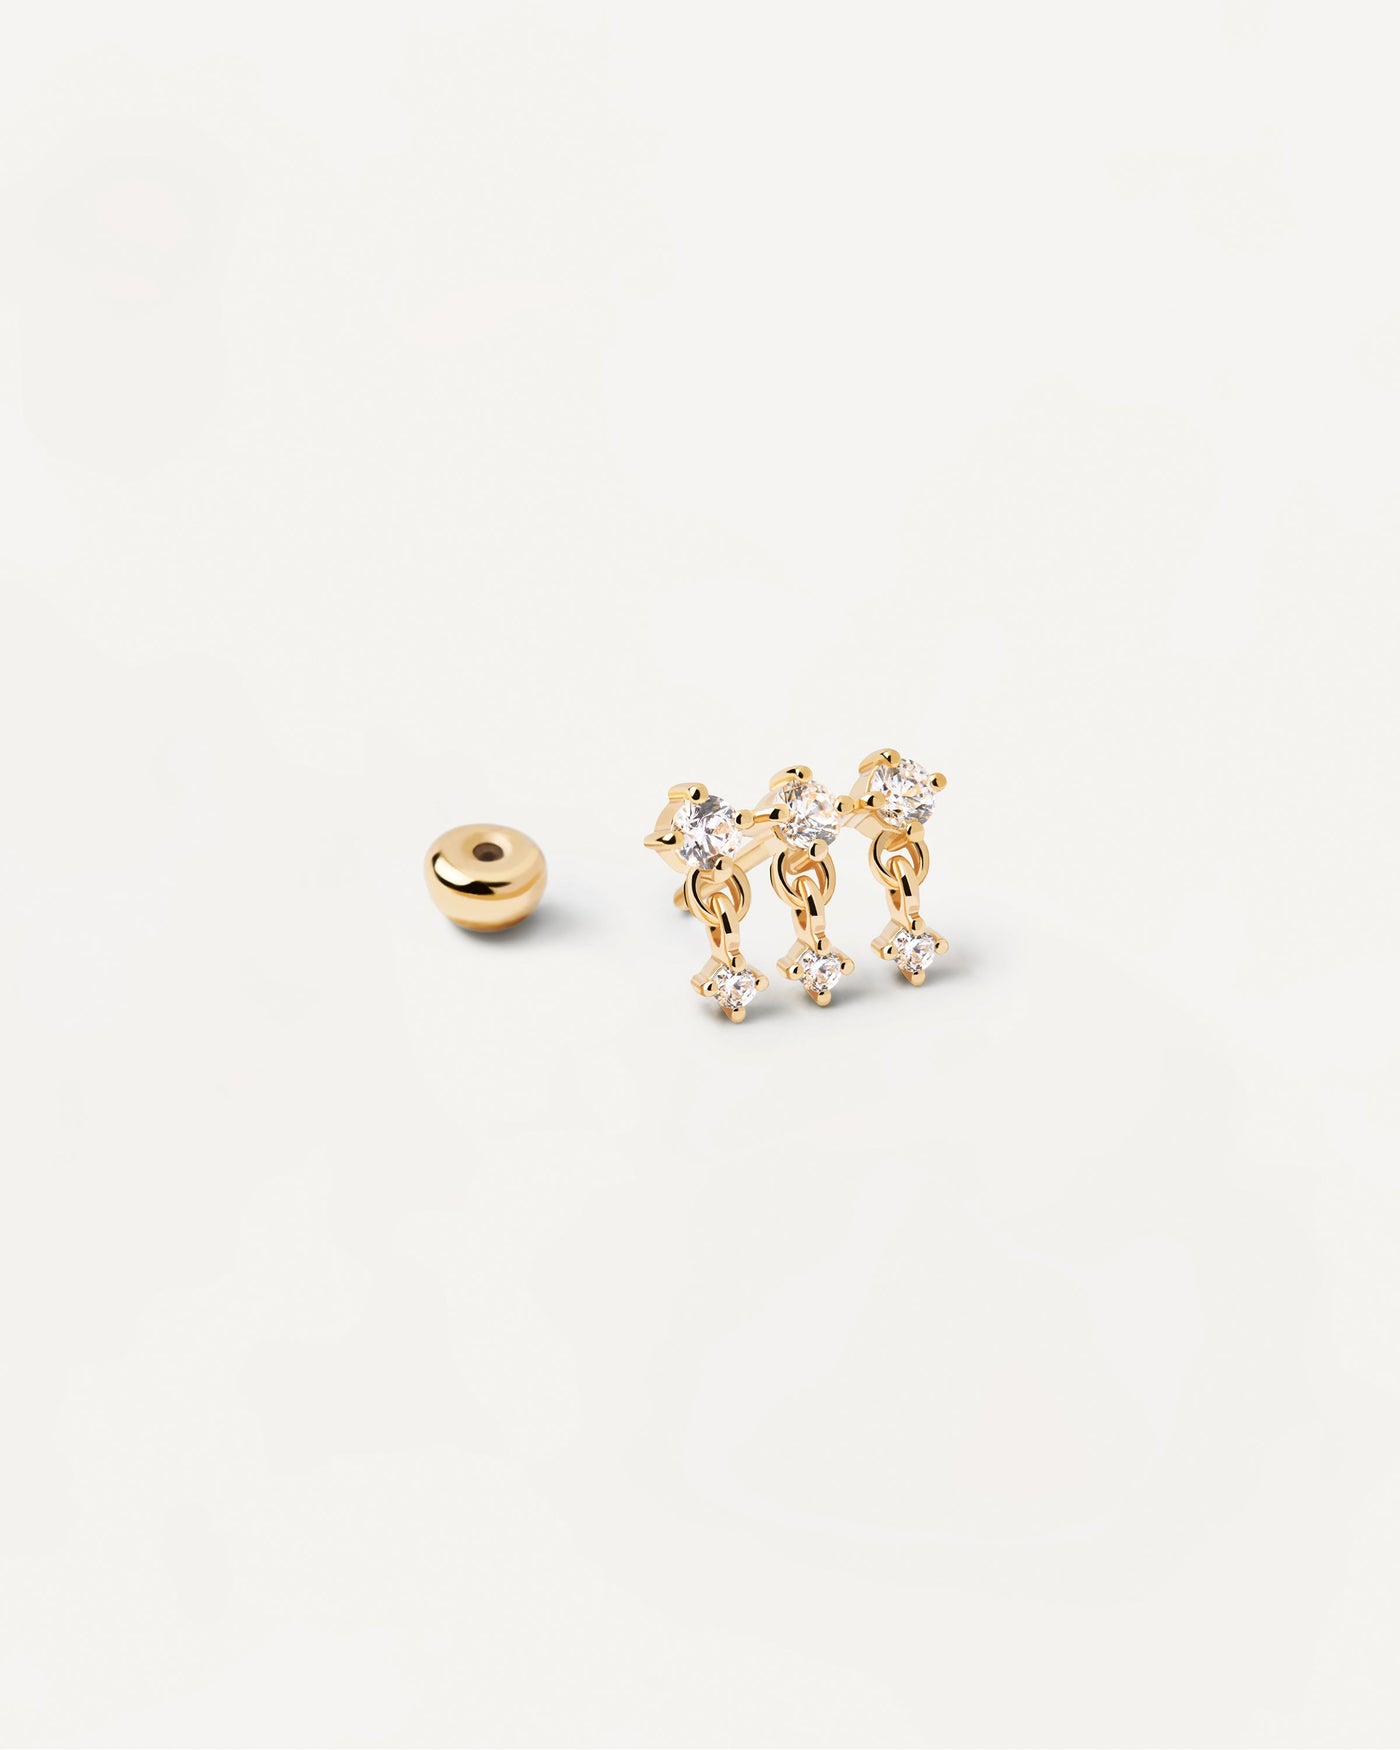 2023 Selection | Sol Single Earring. Gold-plated ear piercing with trinity of white zirconia. Get the latest arrival from PDPAOLA. Place your order safely and get this Best Seller. Free Shipping.